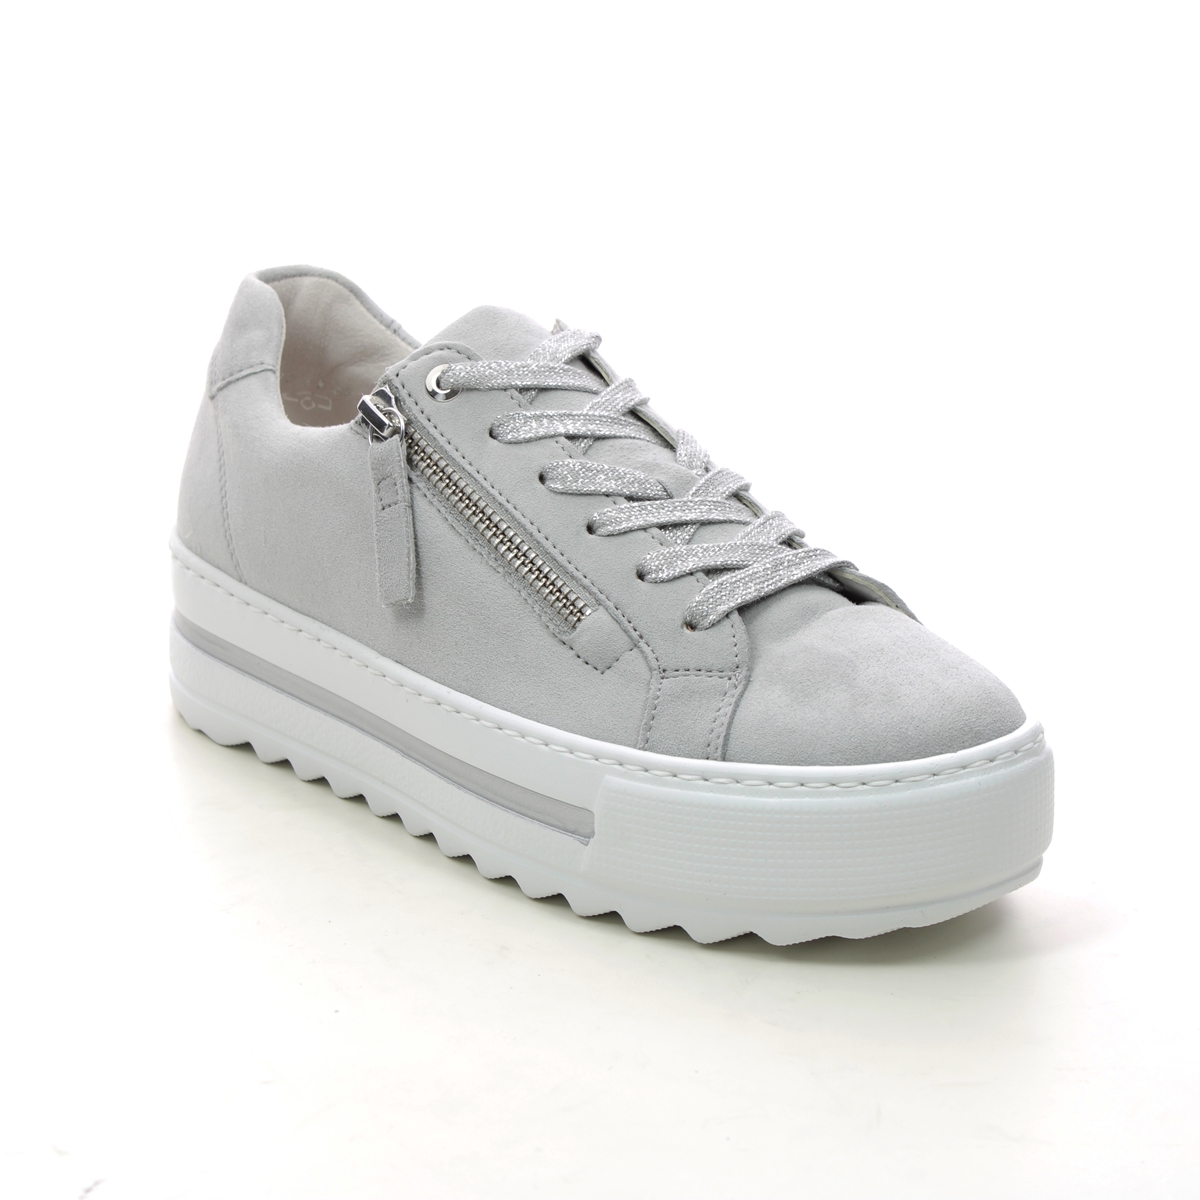 Gabor Heather Light Grey Suede Womens trainers 26.498.40 in a Plain Leather in Size 3.5